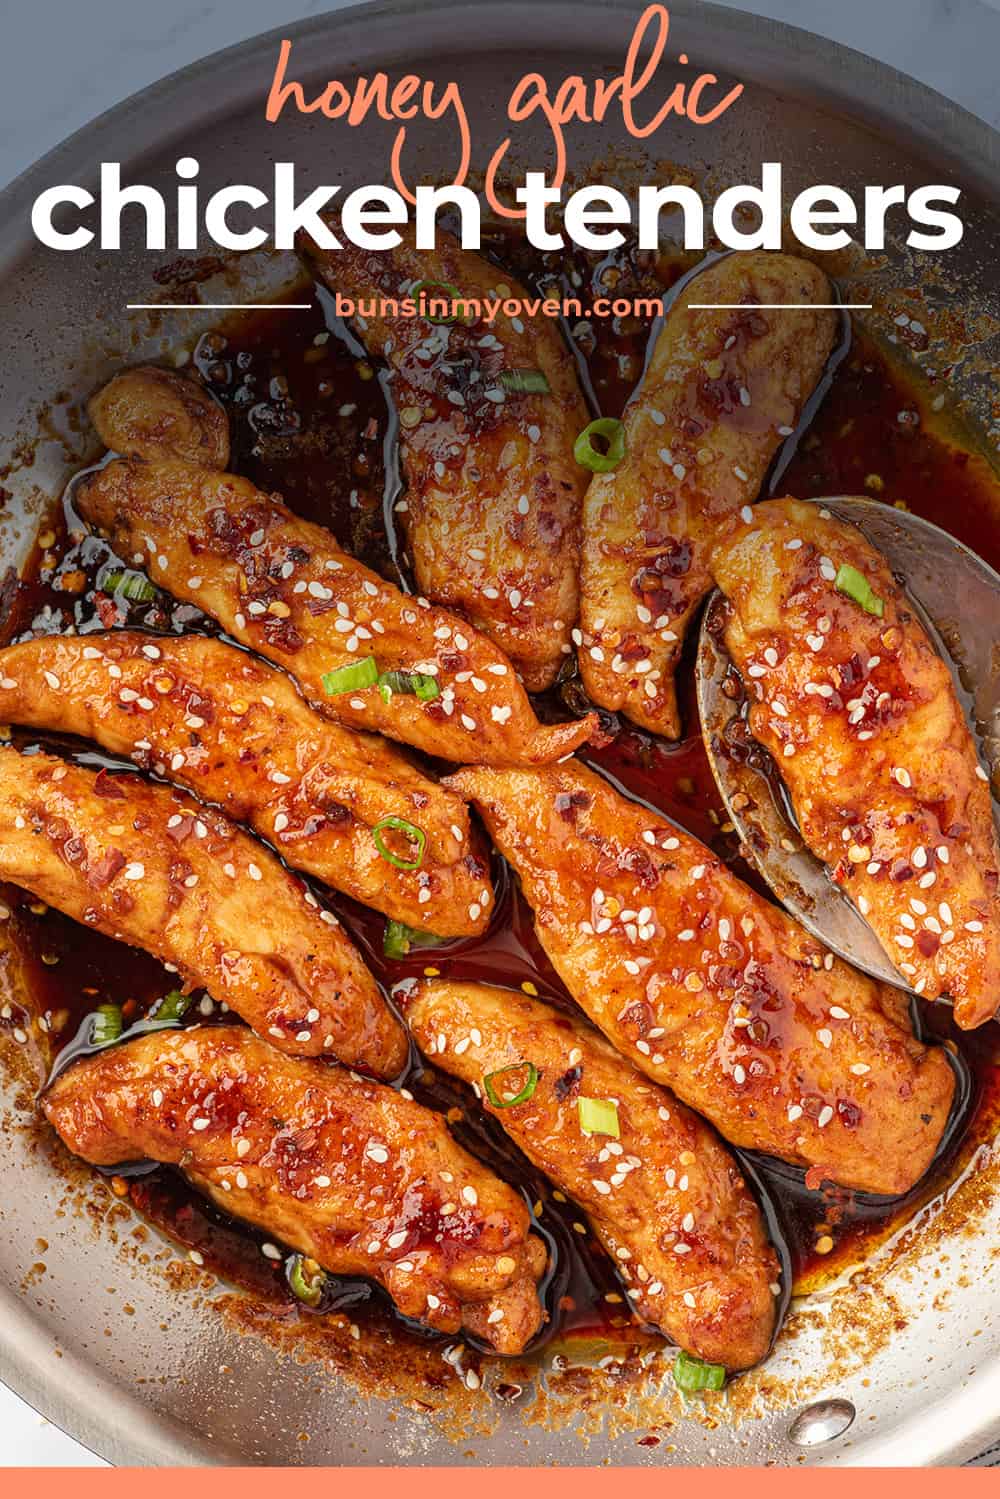 HOney garlic chicken tenders in skillet with text for Pinterest.